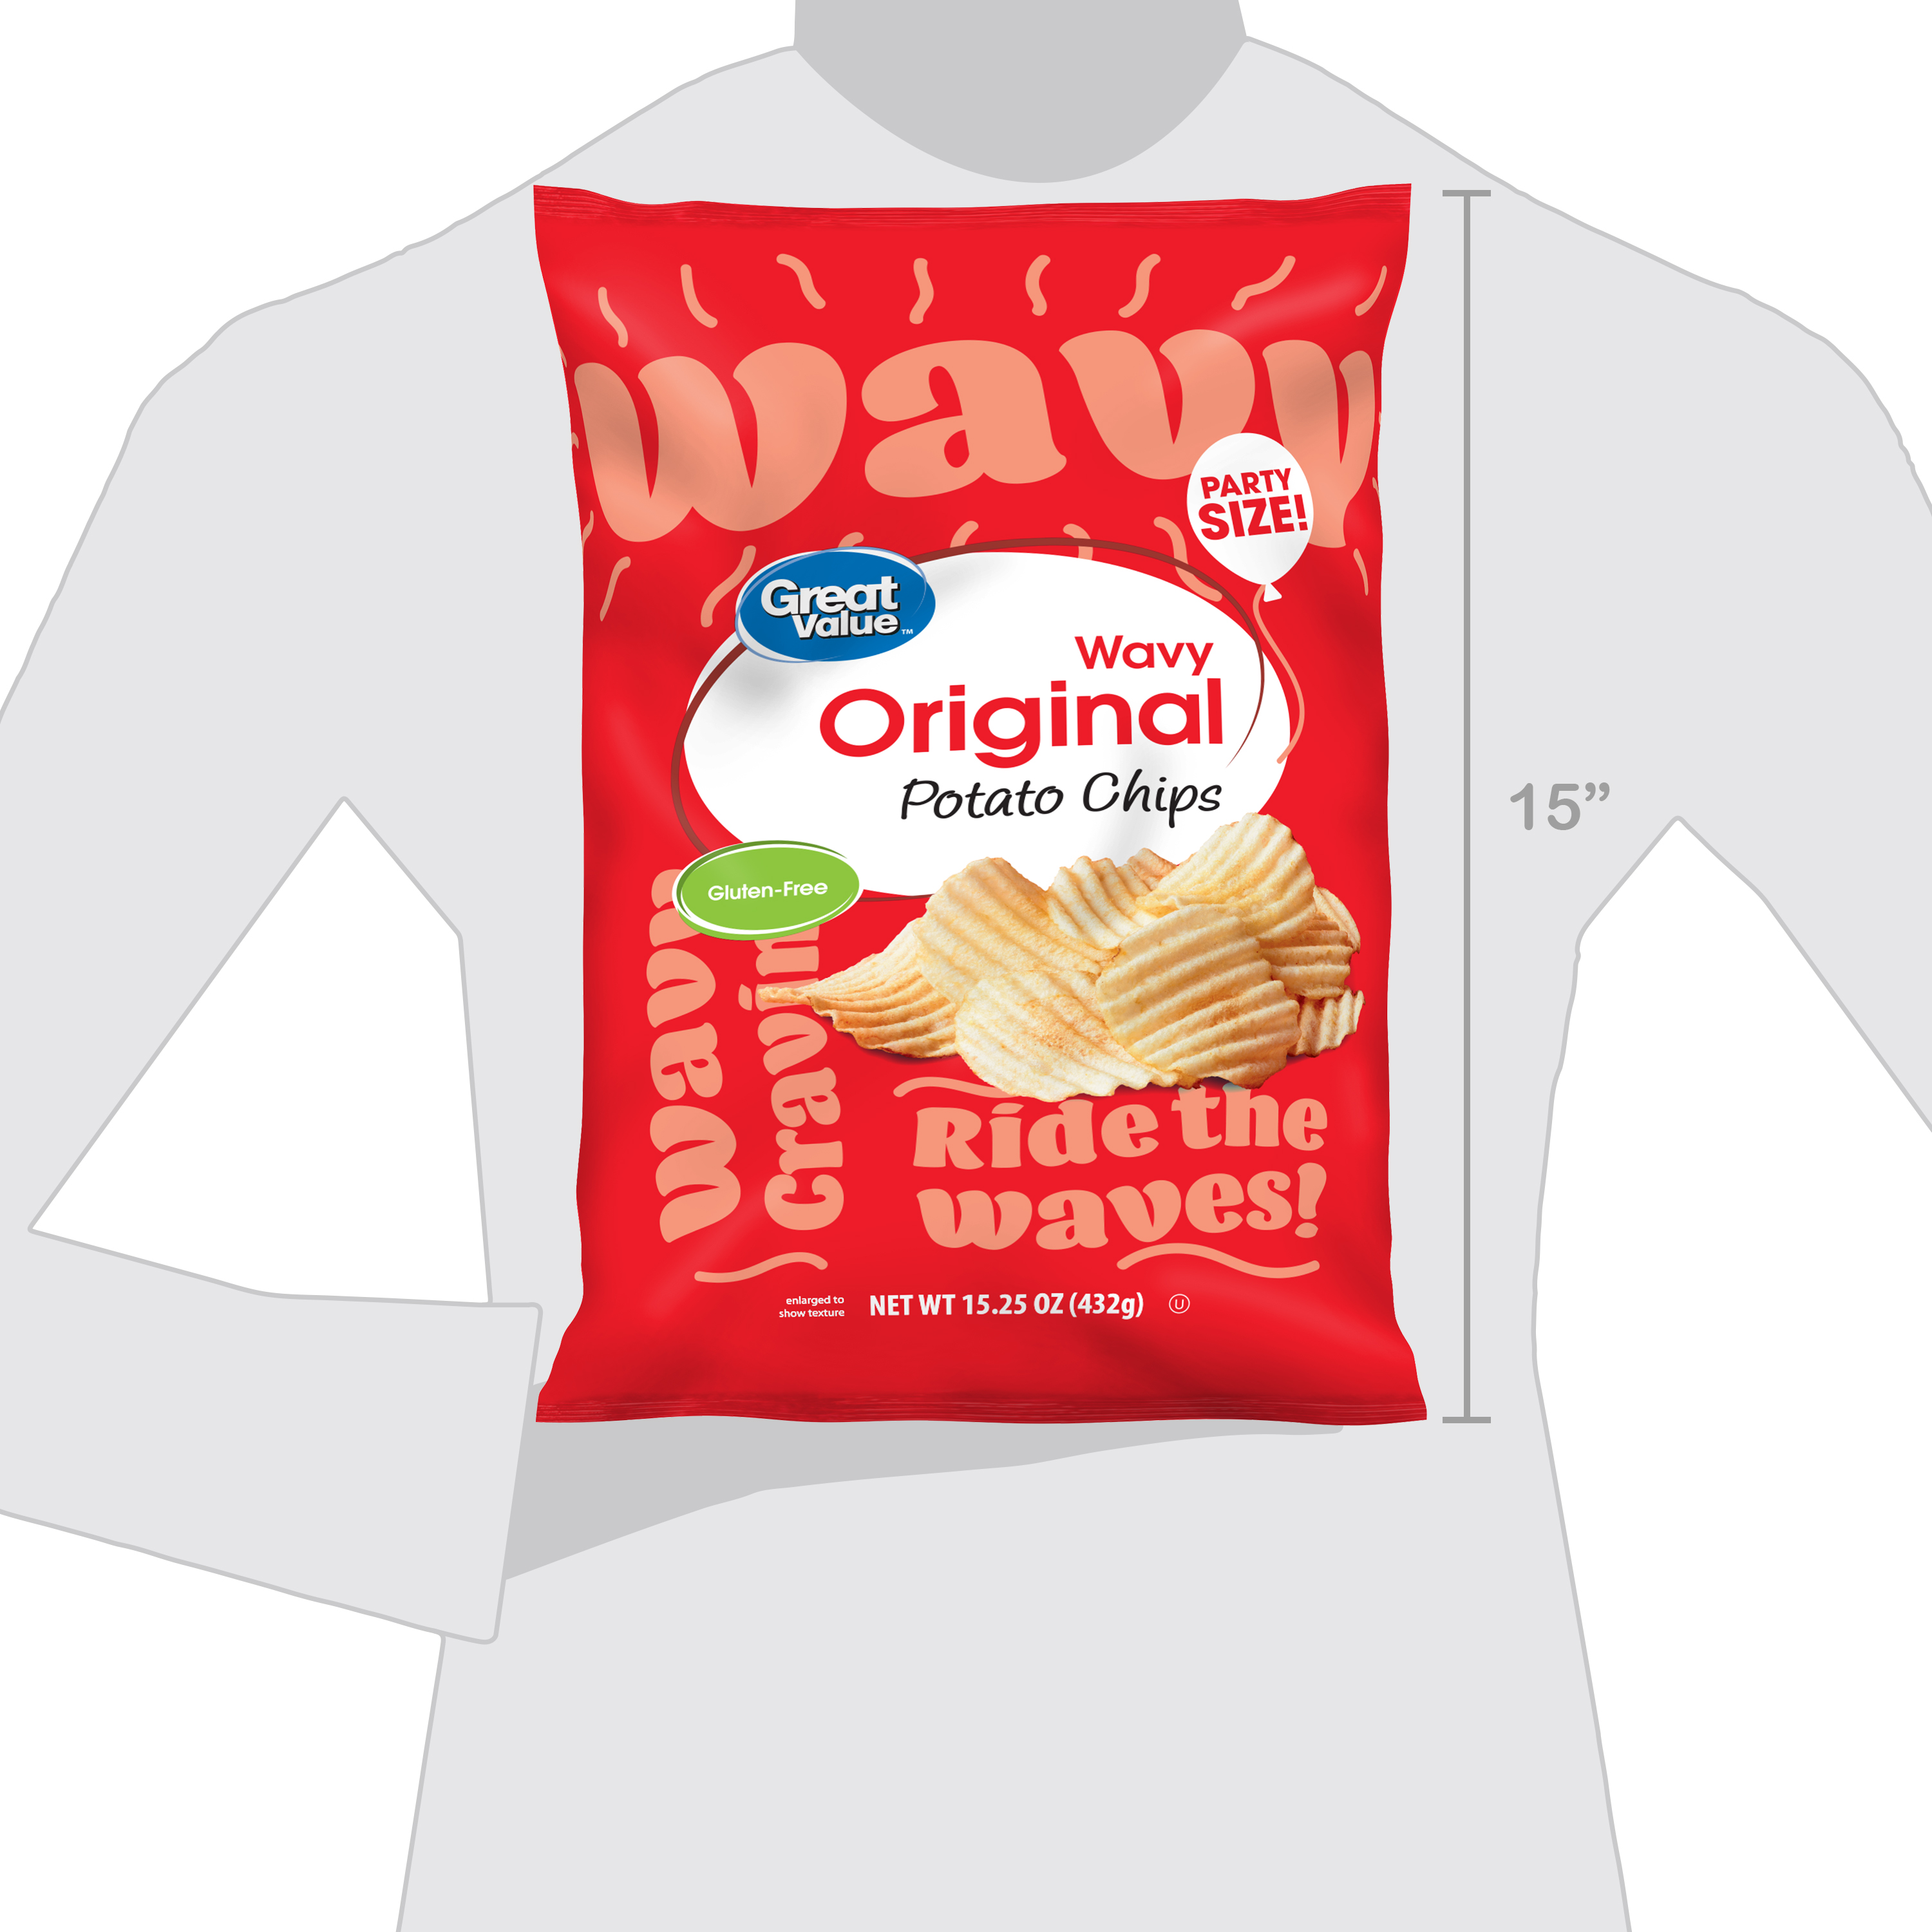 Great Value Original Wavy Potato Chips Party Size, 15.25 oz - image 4 of 8